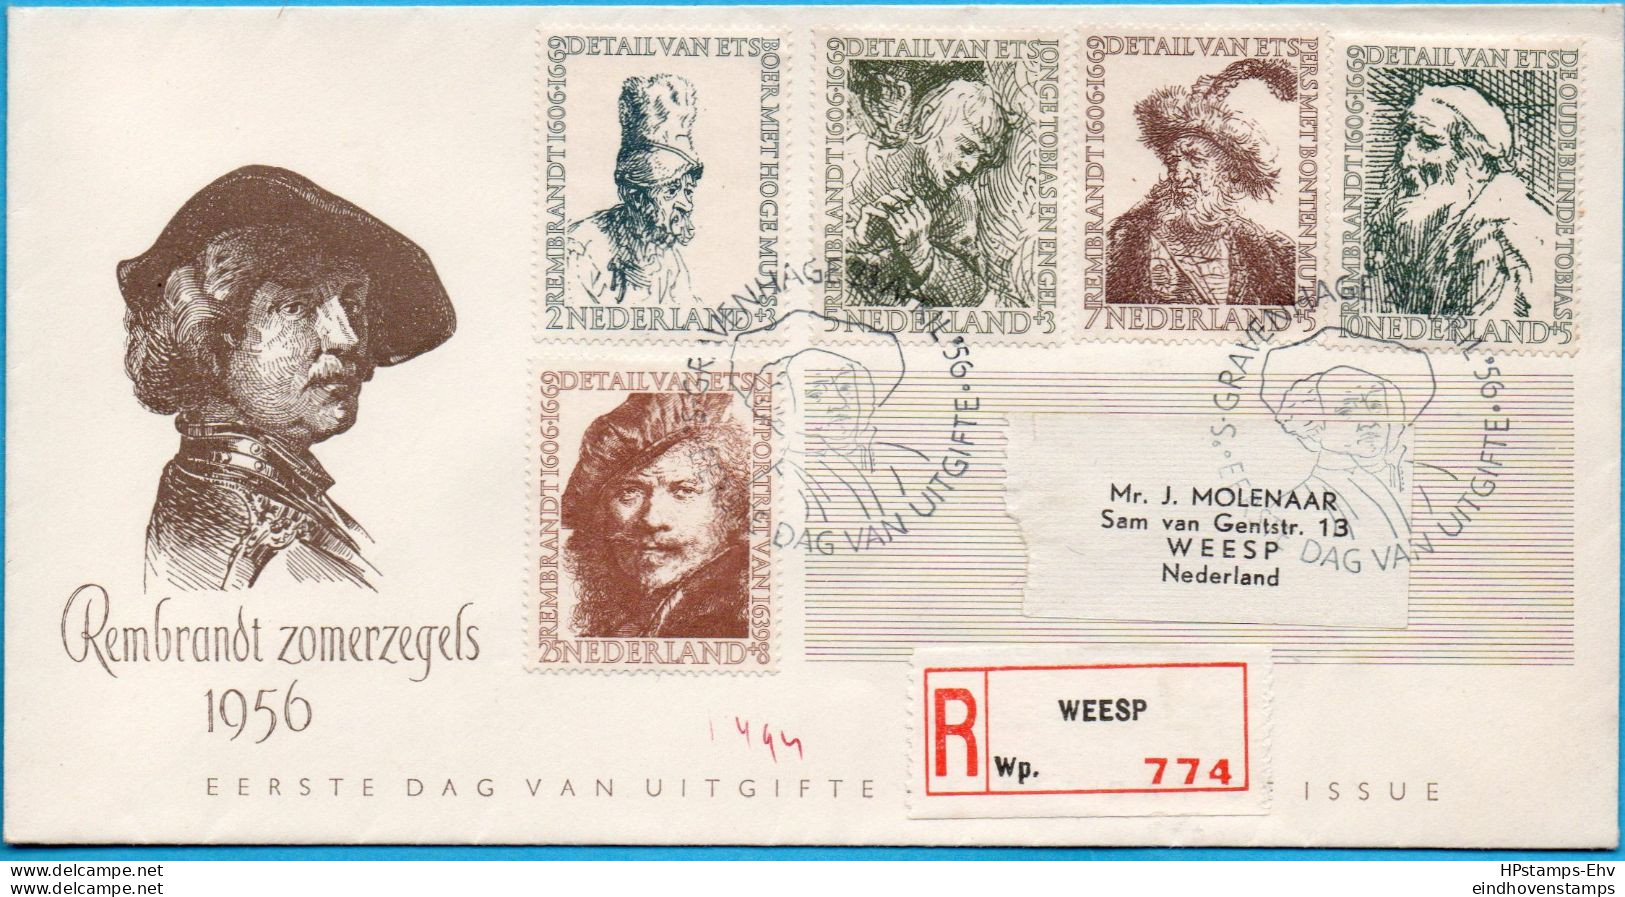 Netherlands 1956 Rembrandt Stamps First Day Cover Mailed Registered To Weesp NL-FDC-56.01 - Rembrandt